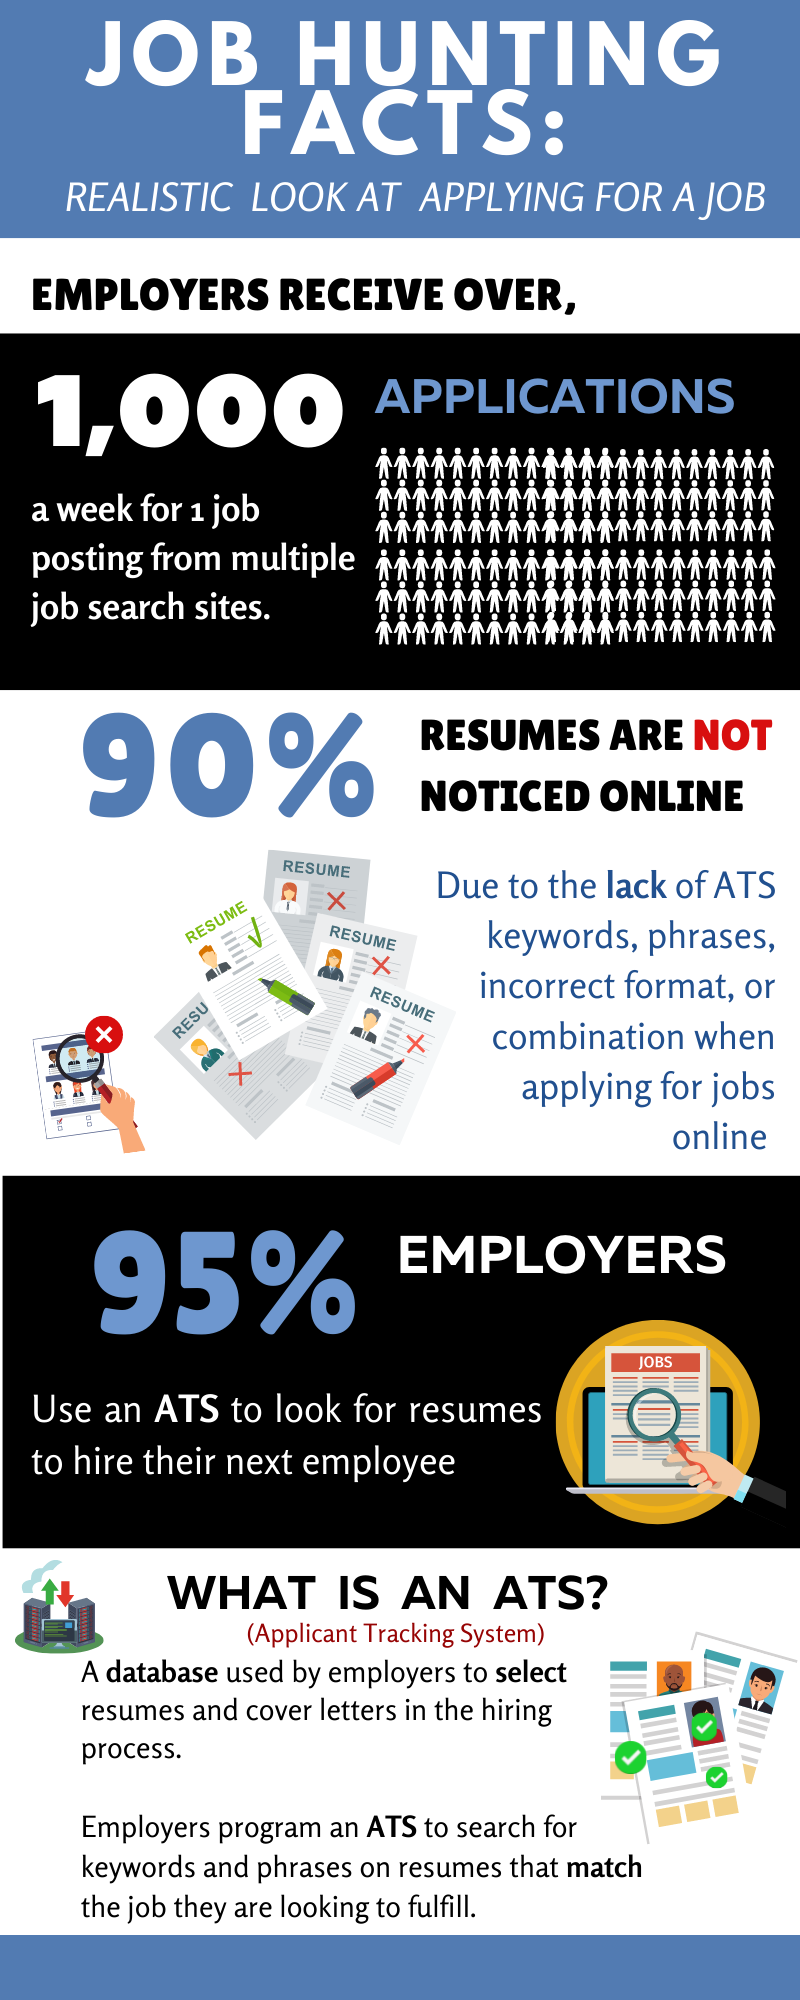 ats resume template and ats resume format are important for a resume for a job, which is similar to cover letter examples and a cover letter template is included in bundle. interview questions to ask employers are very important